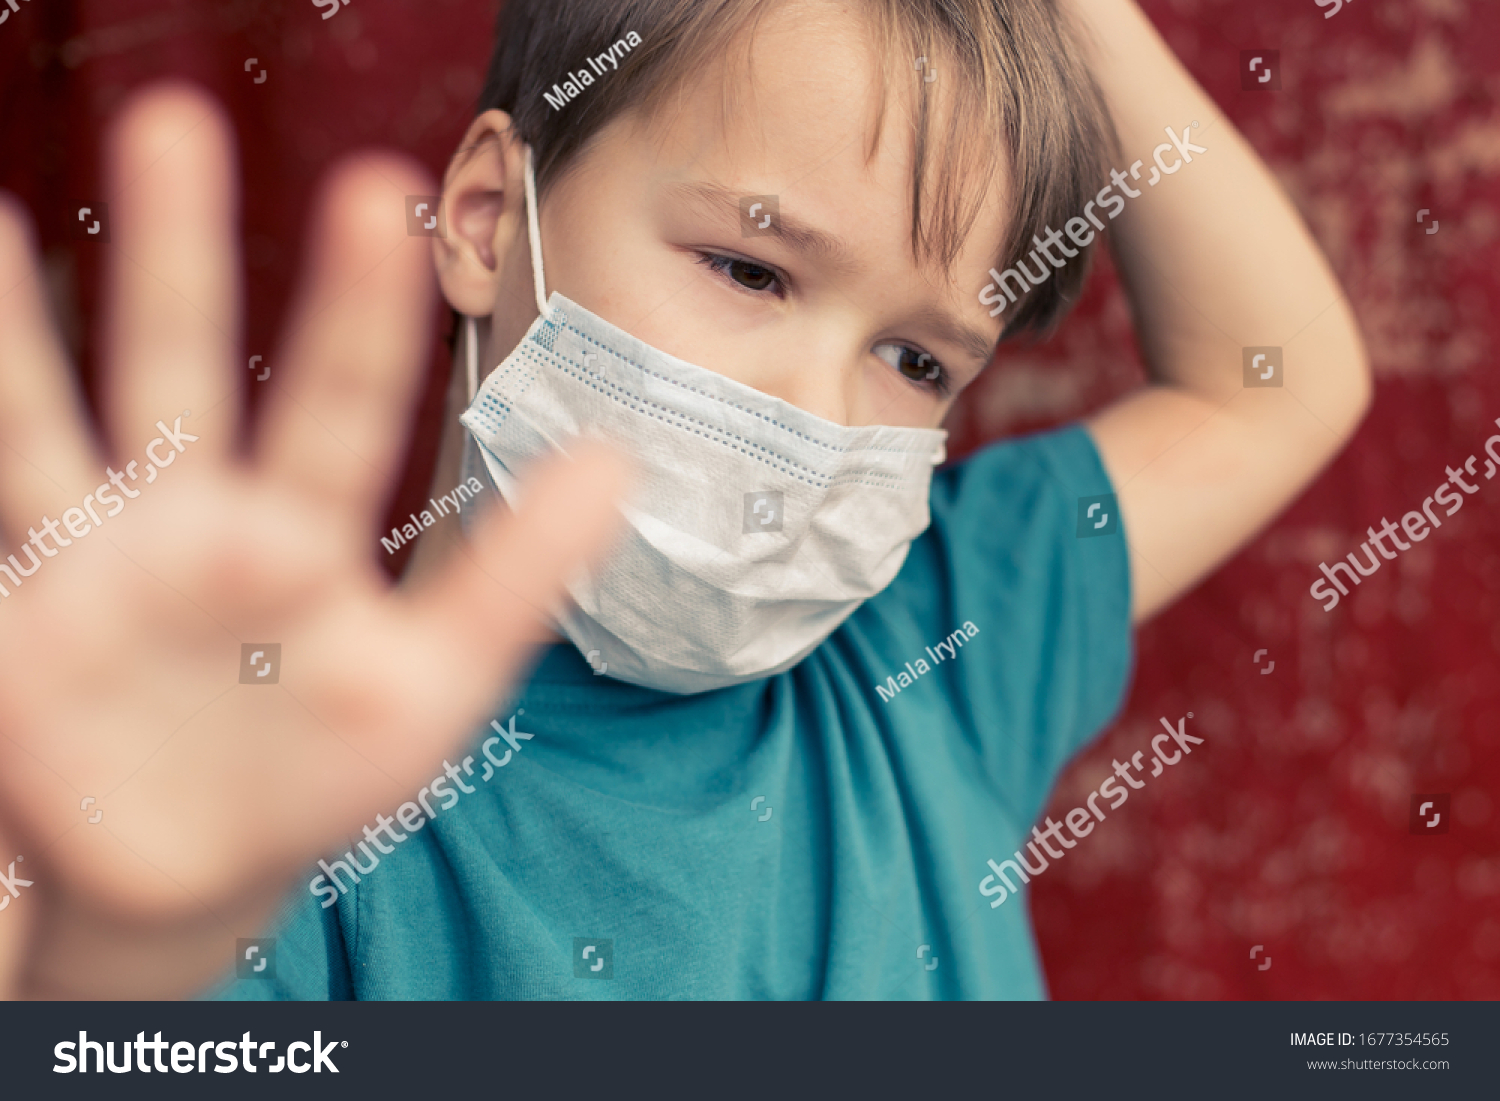 Portrait of Toddler kid wearing medical mask.A boy wearing mouth mask against pandemic. Concept of coronavirus quarantine or covid-19.Protection against virus and infection control concept. #1677354565